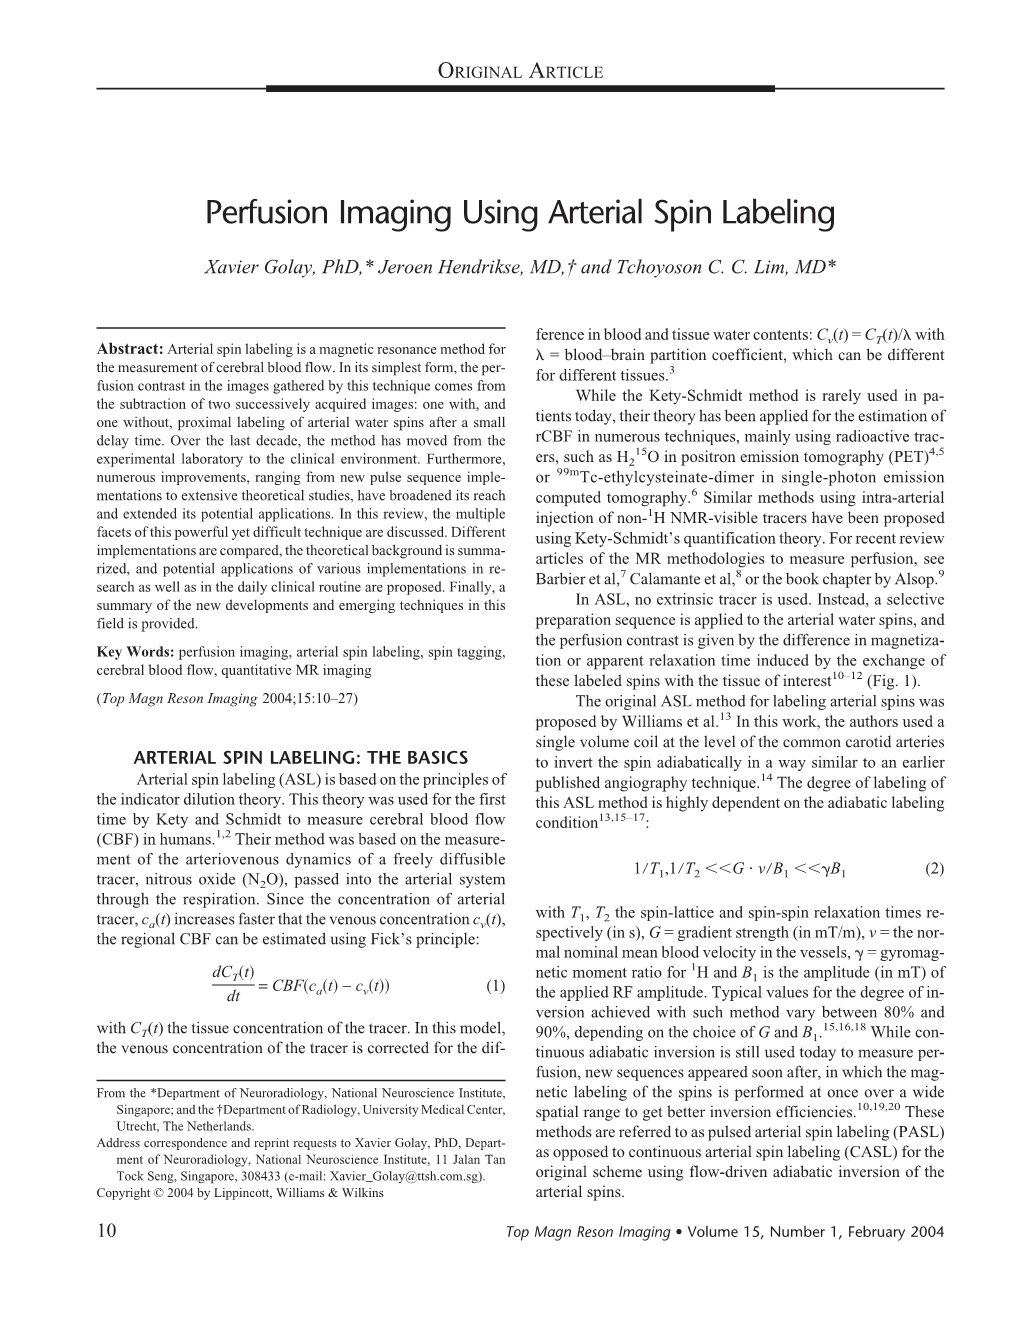 Perfusion Imaging Using Arterial Spin Labeling